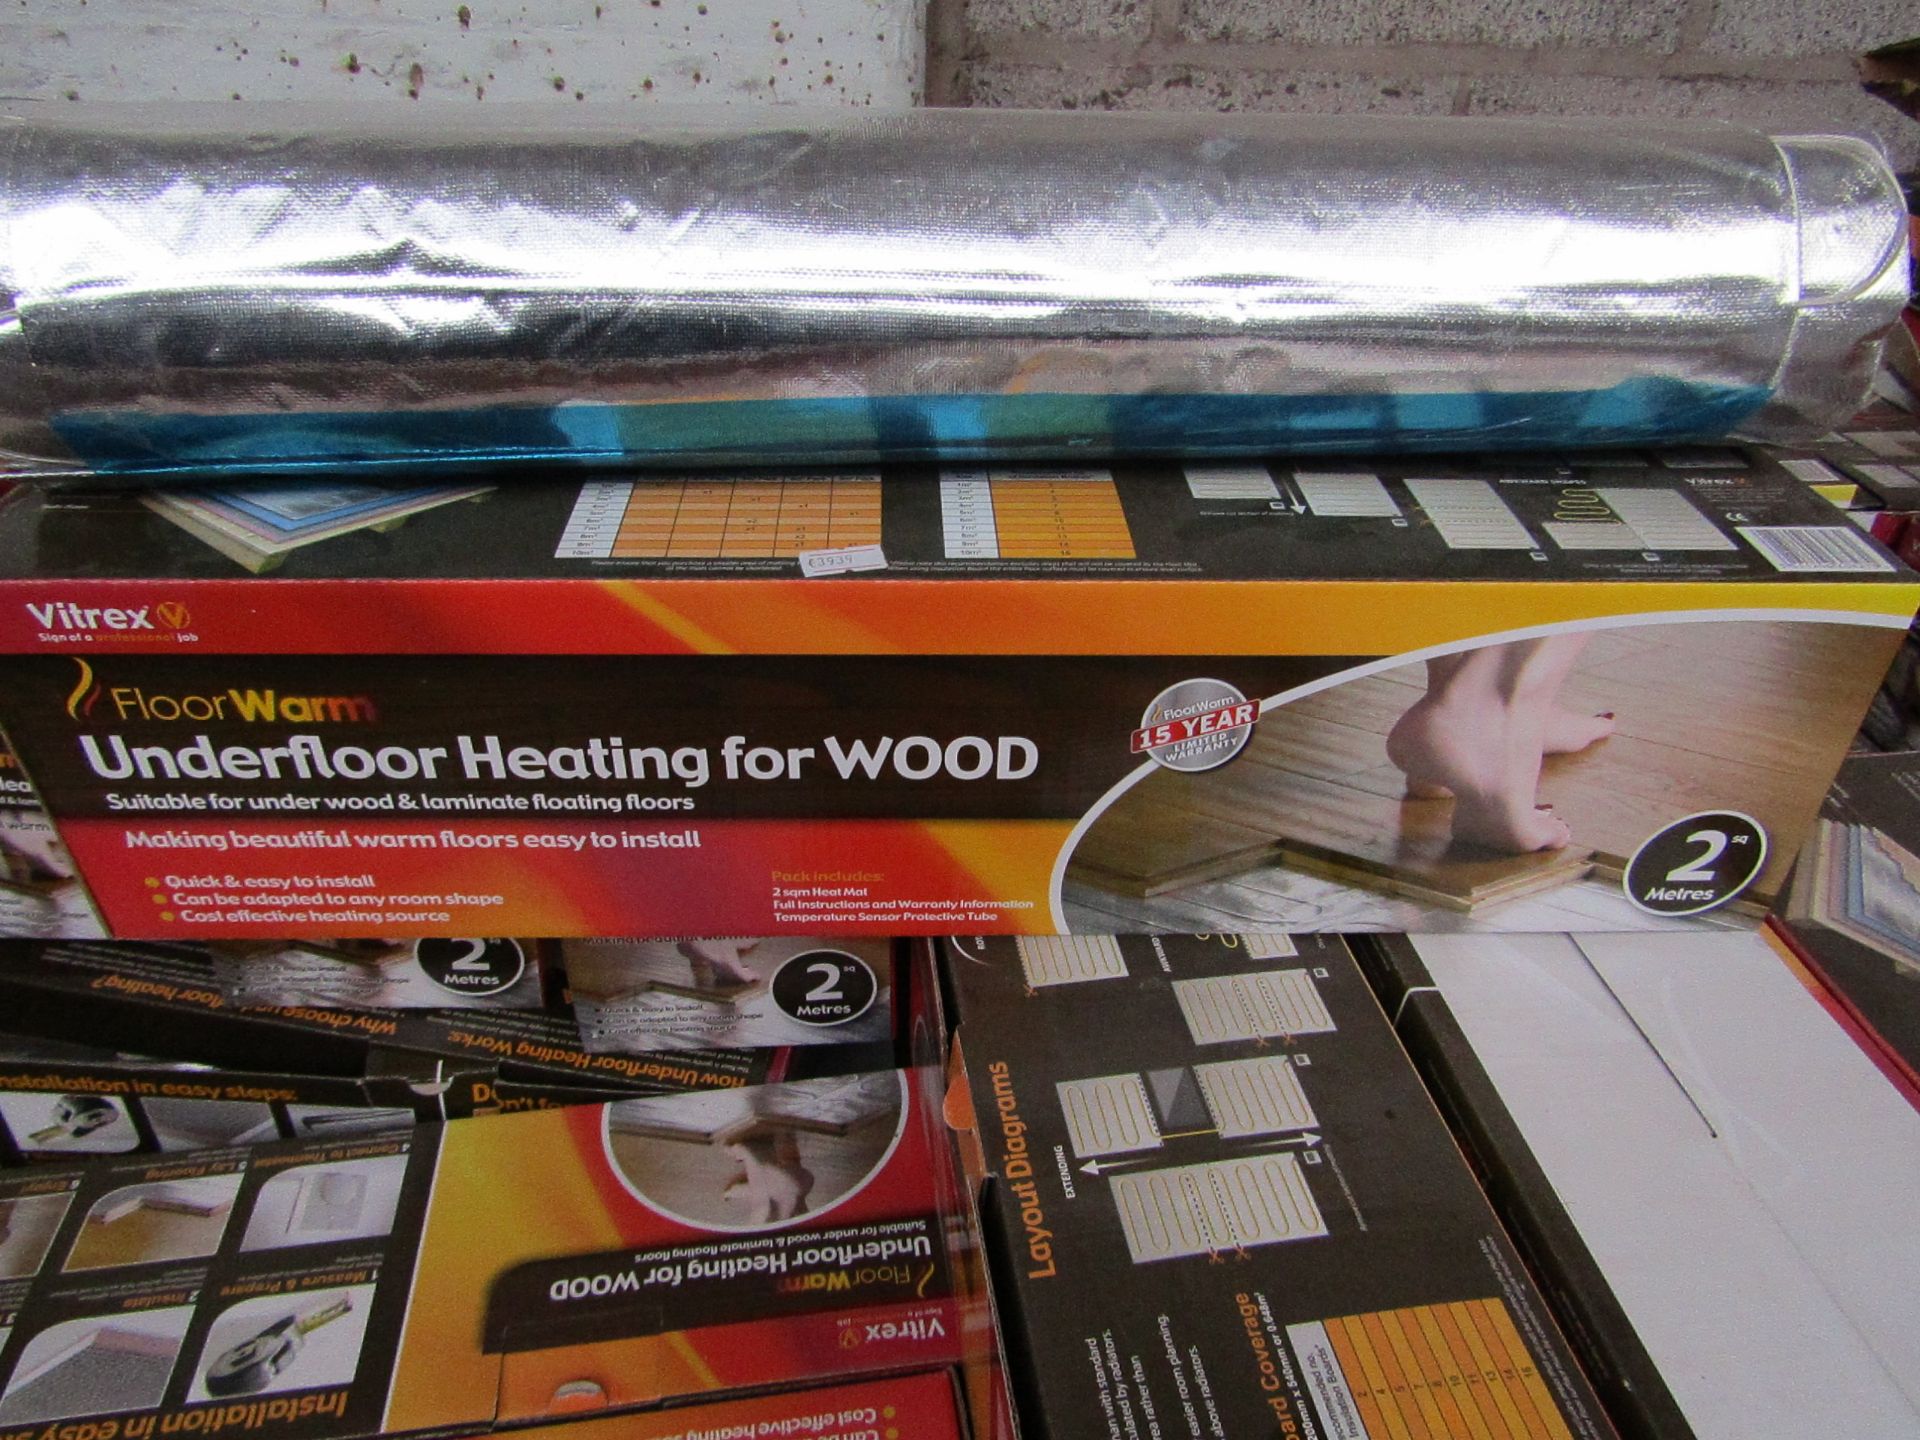 1x Vitrex Floor Warm 2m2 underfloor heating for wood, new and boxed.